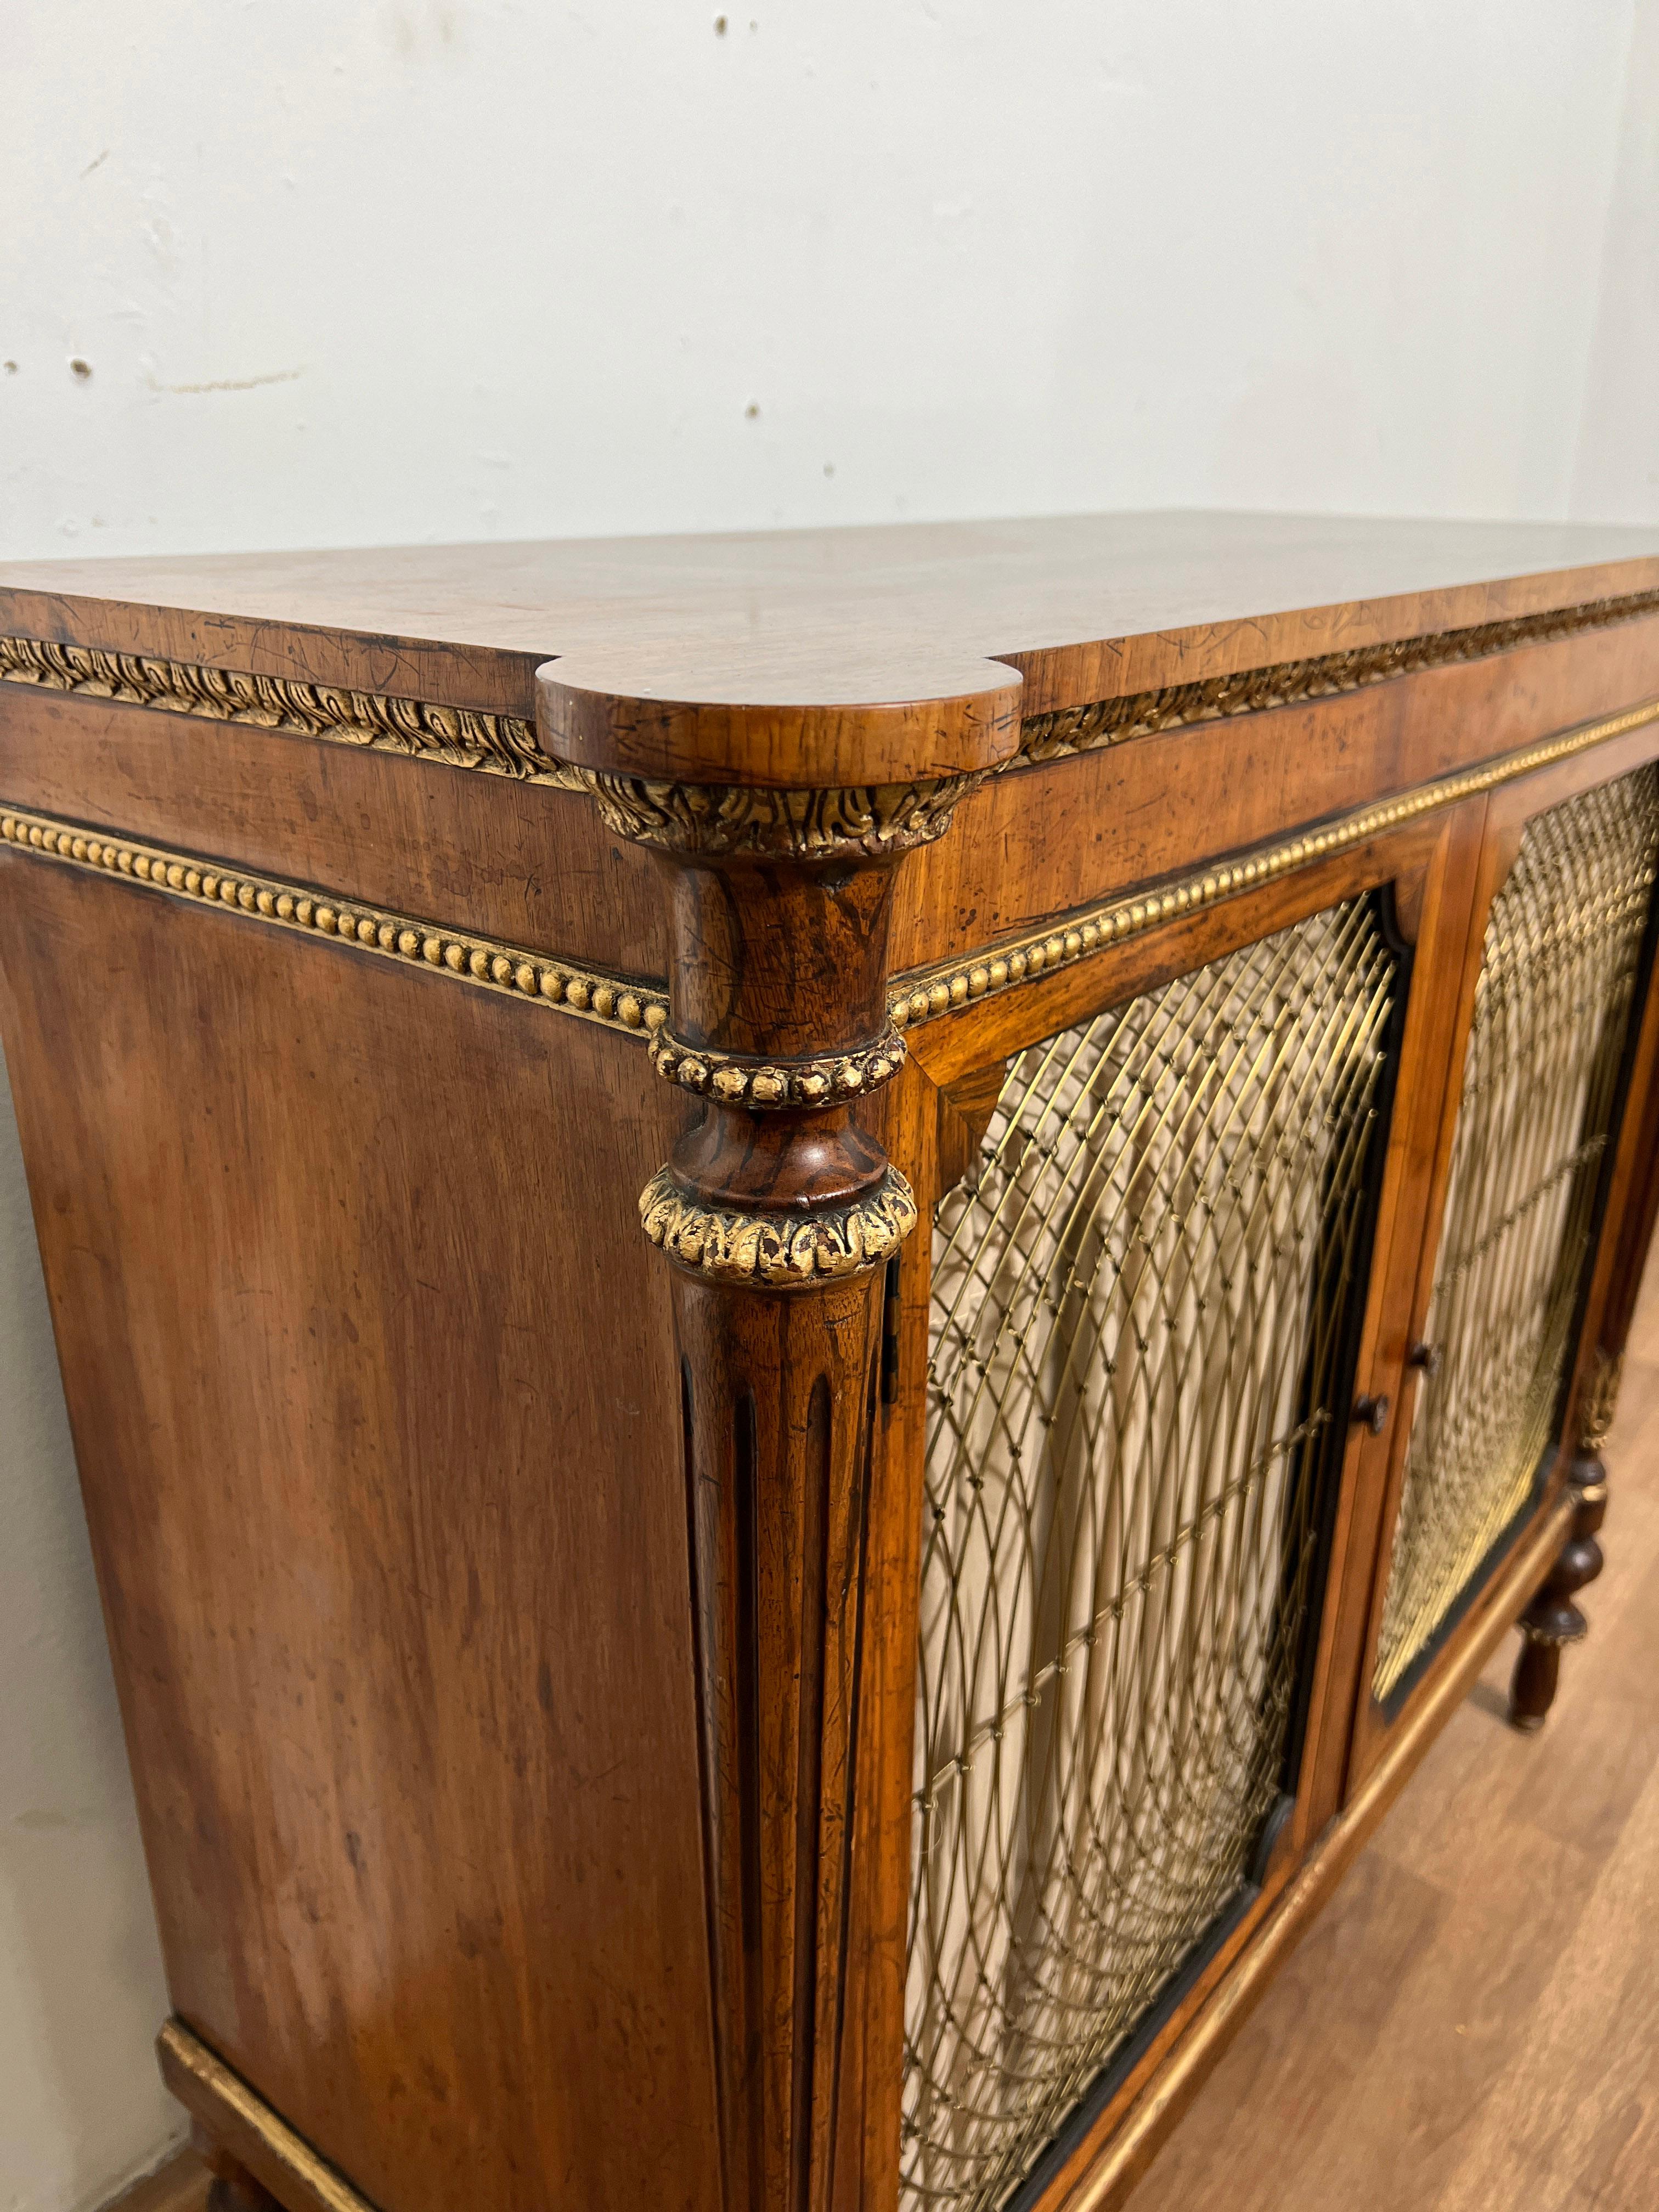 Early 19th Century English Regency Grill Front Rosewood Credenza For Sale 9